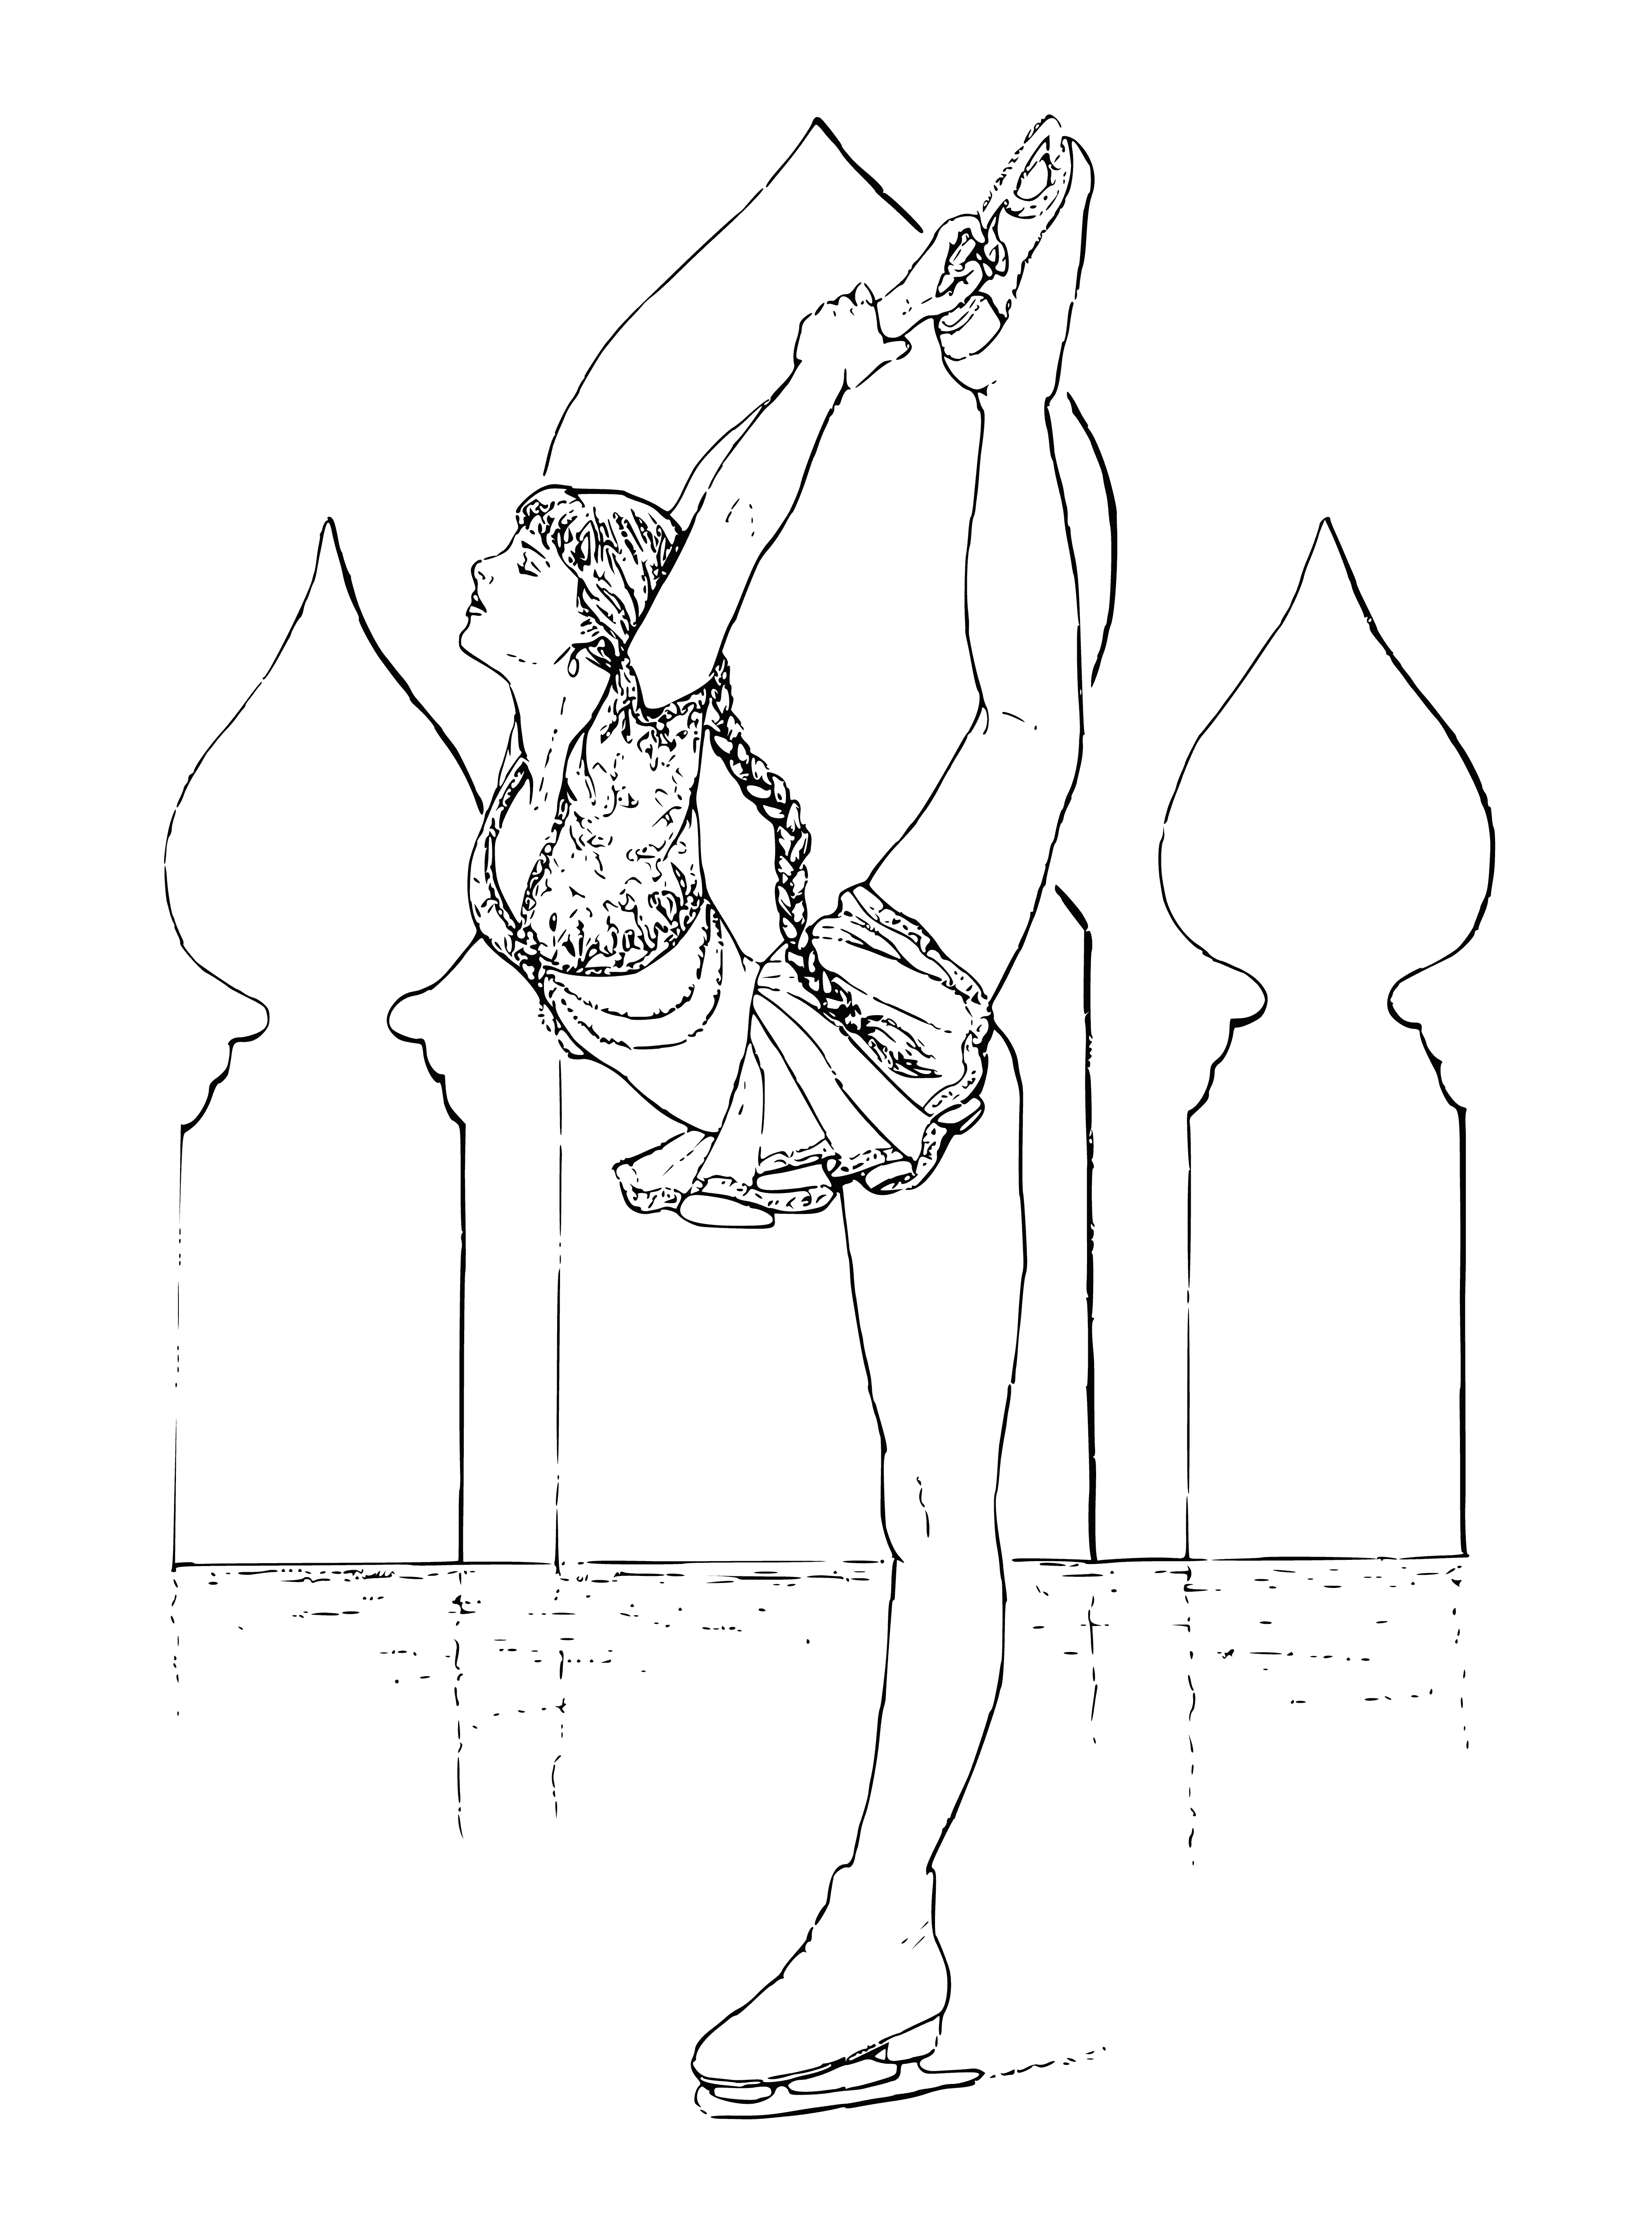 coloring page: Woman figure skating in pink/white dress, spinning gracefully on the ice with long blonde hair.